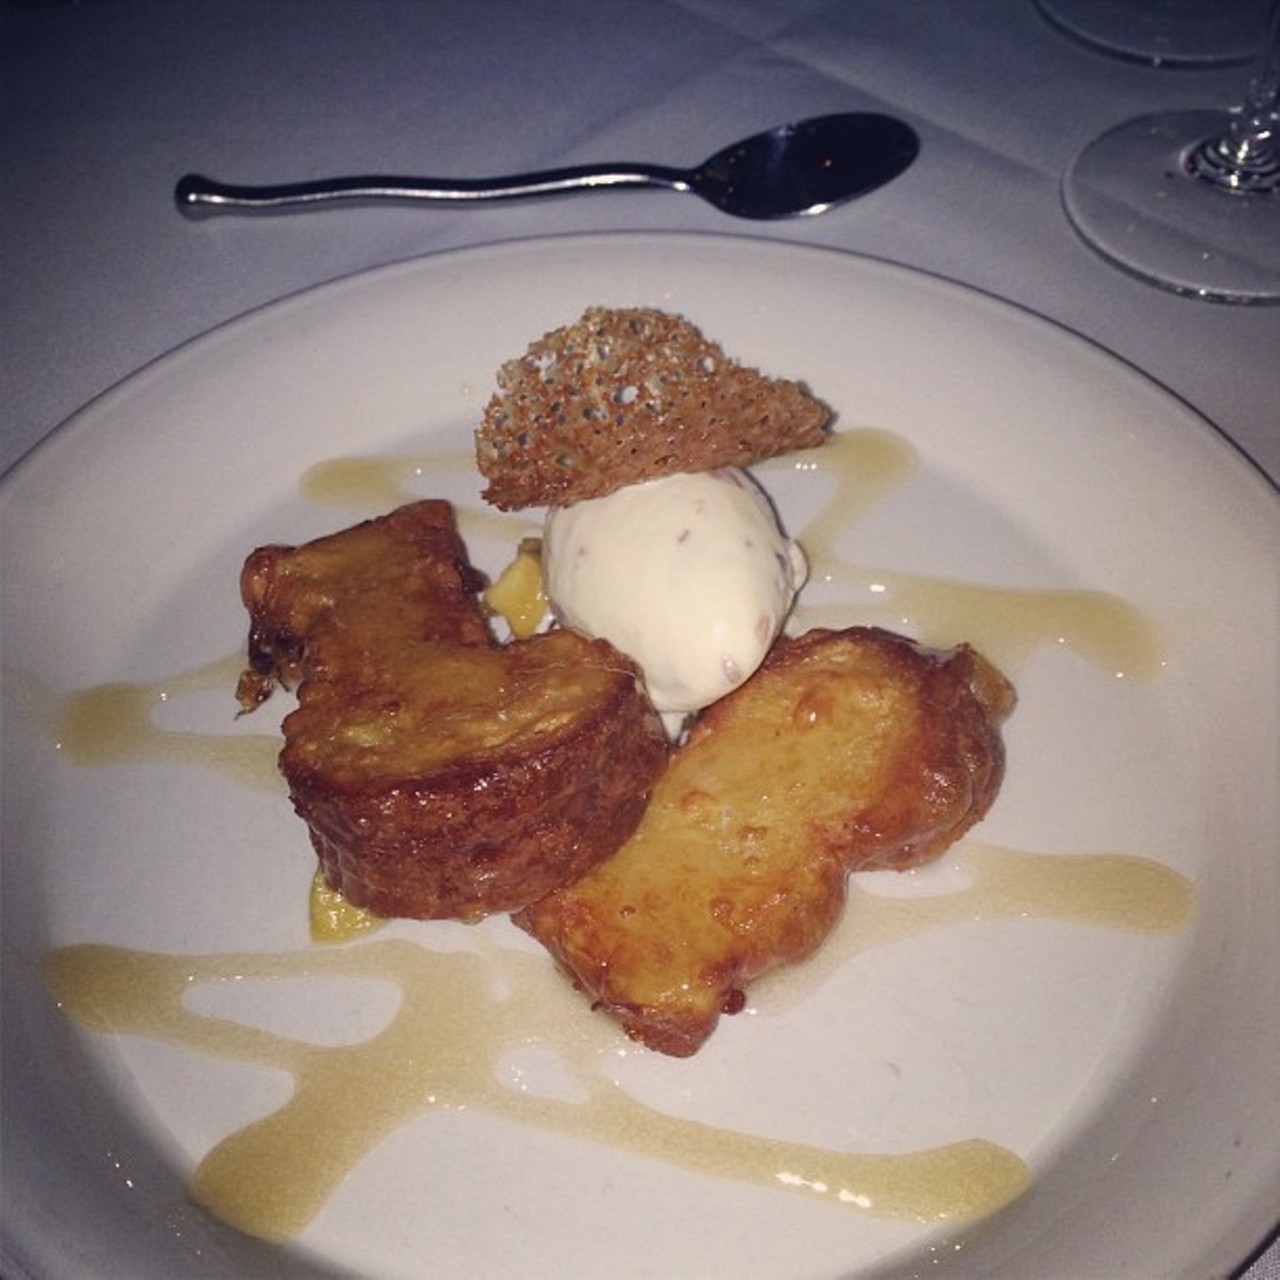 The Iron Chef set the standard for bacon in the 216. And it is The 6 A.M. Special at Lola Bistro that was a culinary catalyst. Brioche French toast topped with caramelized apples along with some mind blowing  maple-bacon ice cream. Lola Bistro is located at 2058 E 4th St. Call 216- 621-5652 or visit lolabistro.com for more information.